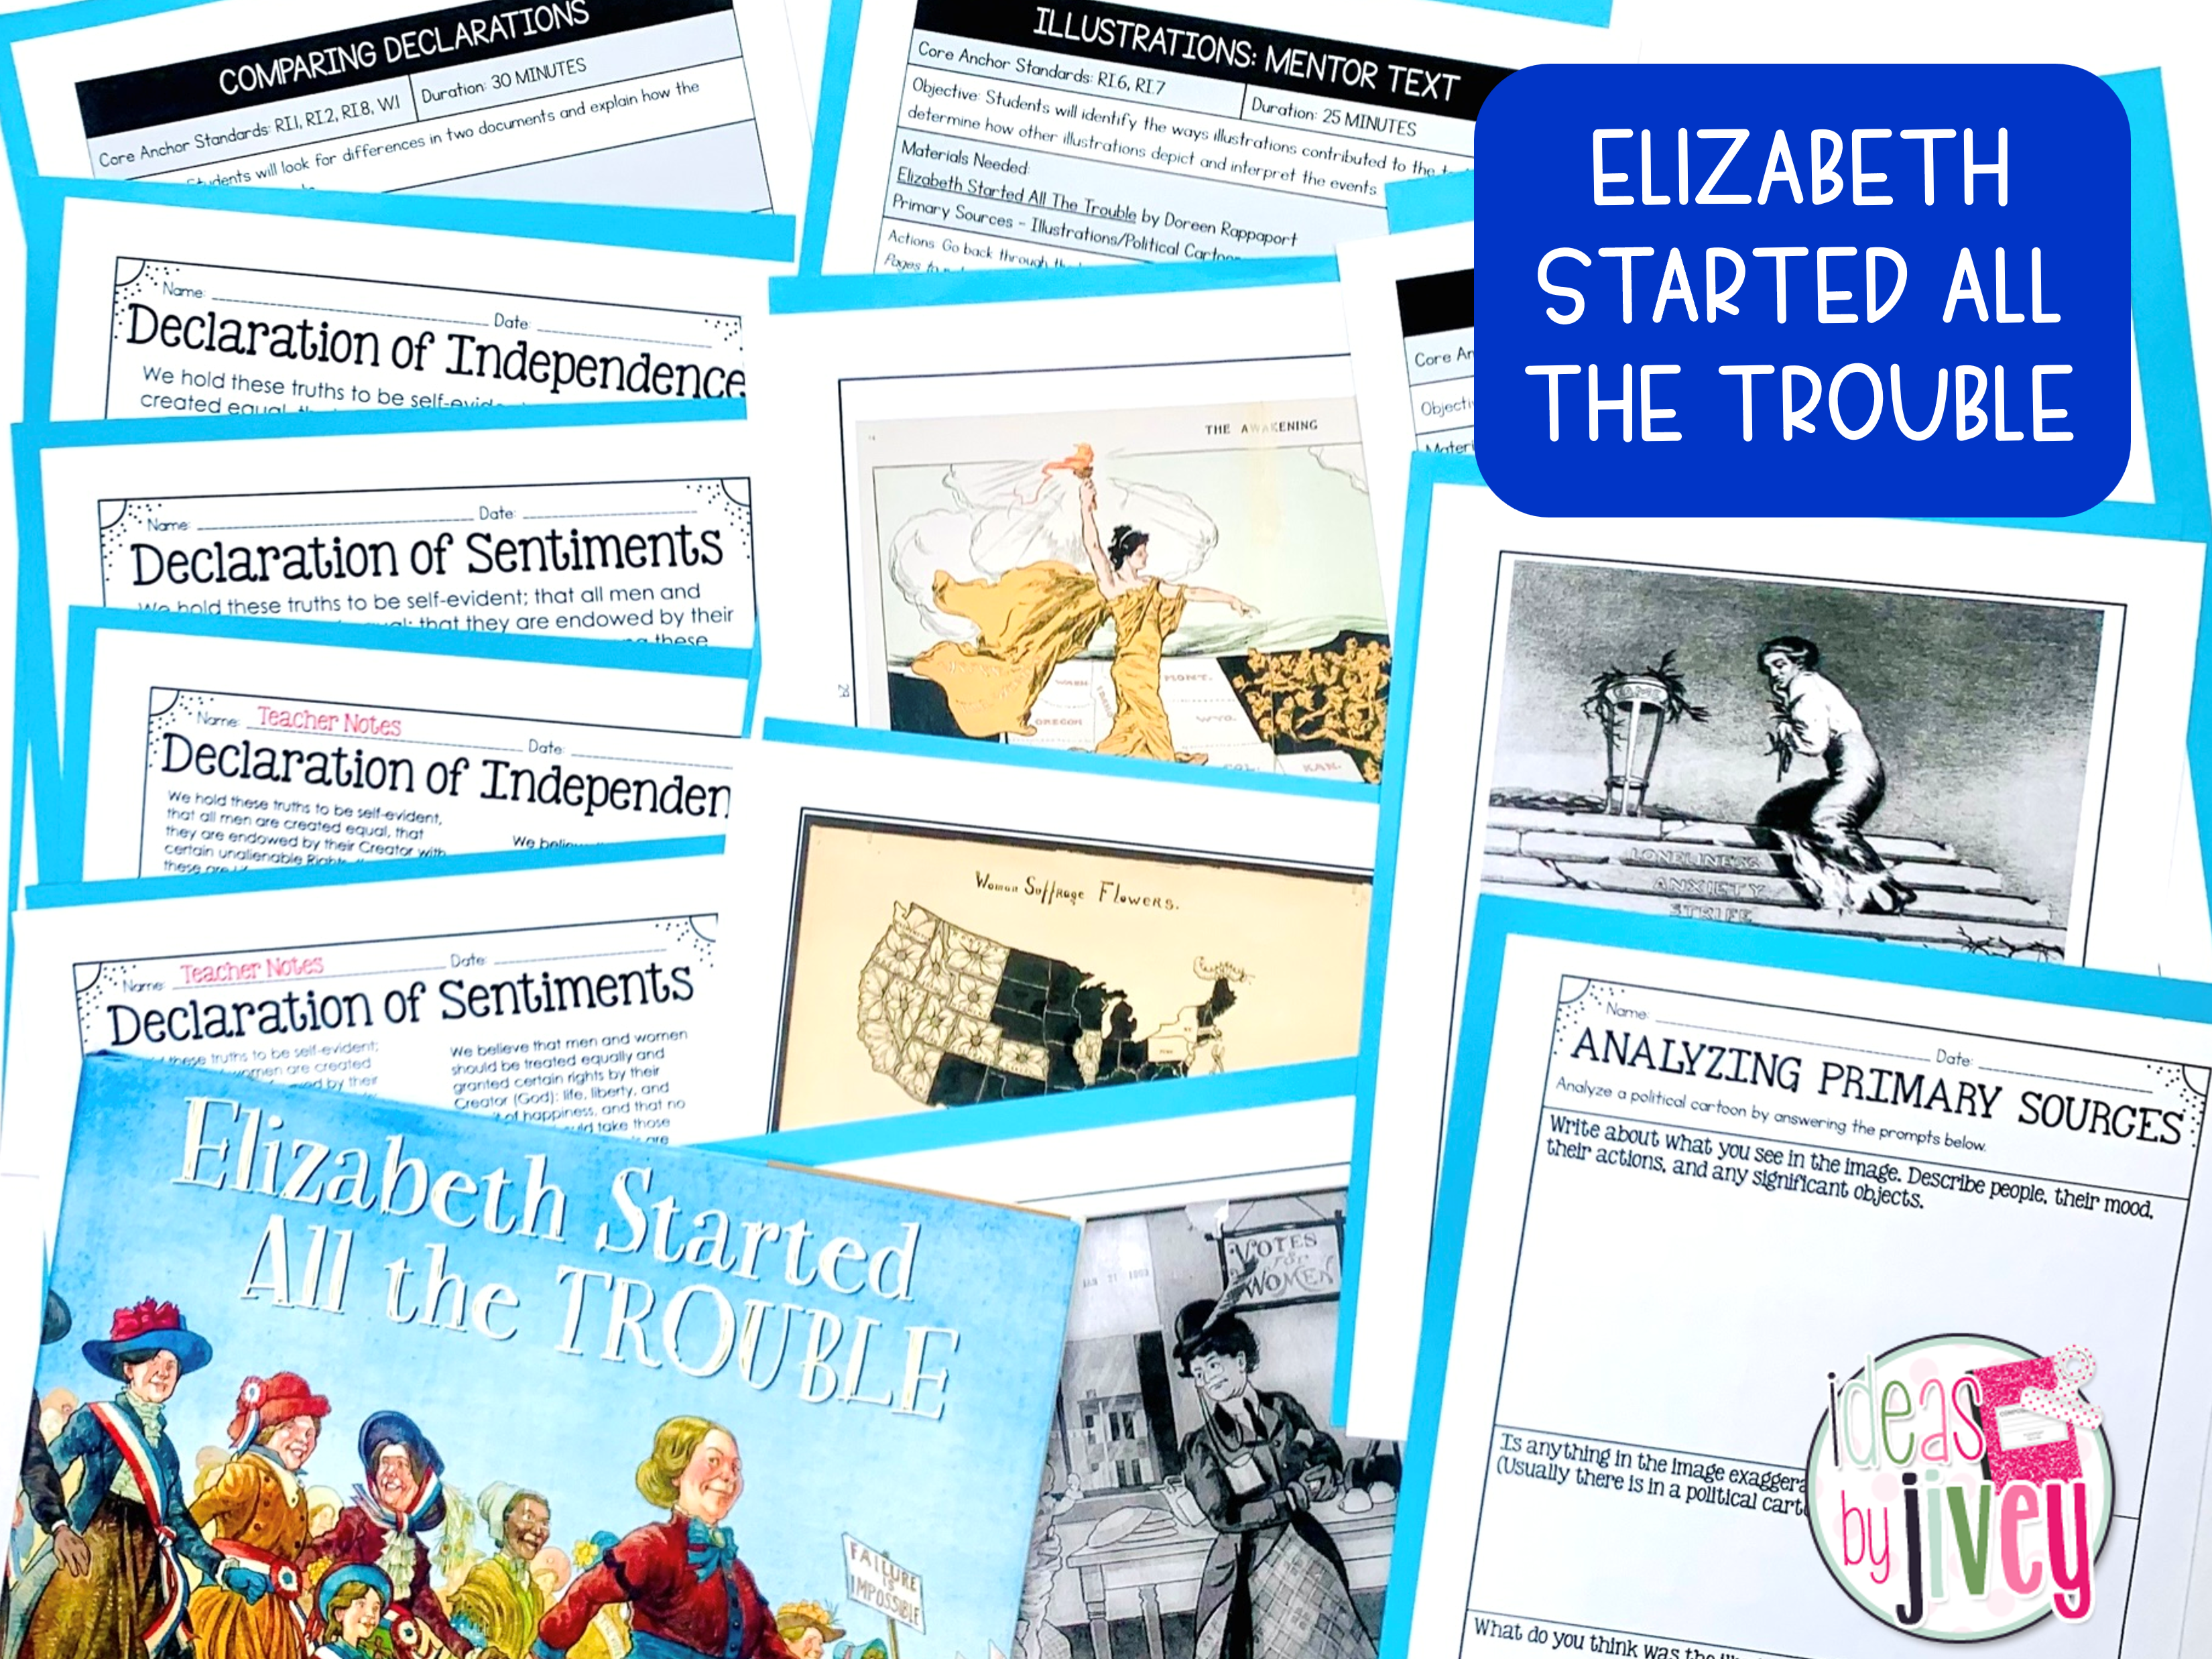 use a variety of primary sources with Elizabeth Started All the Trouble